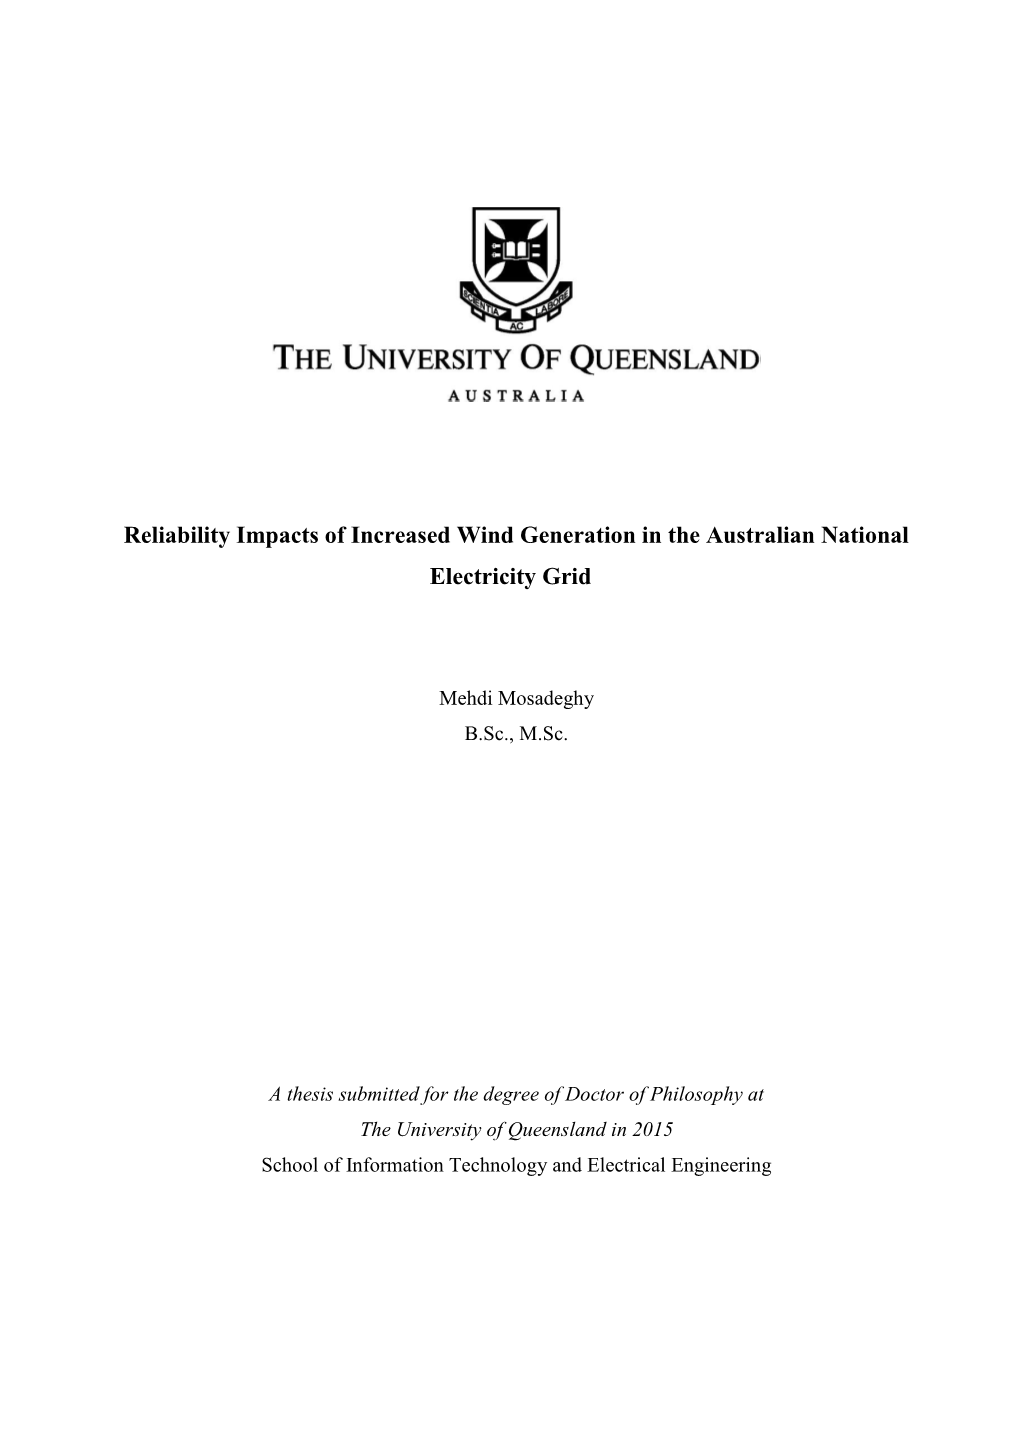 Reliability Impacts of Increased Wind Generation in the Australian National Electricity Grid